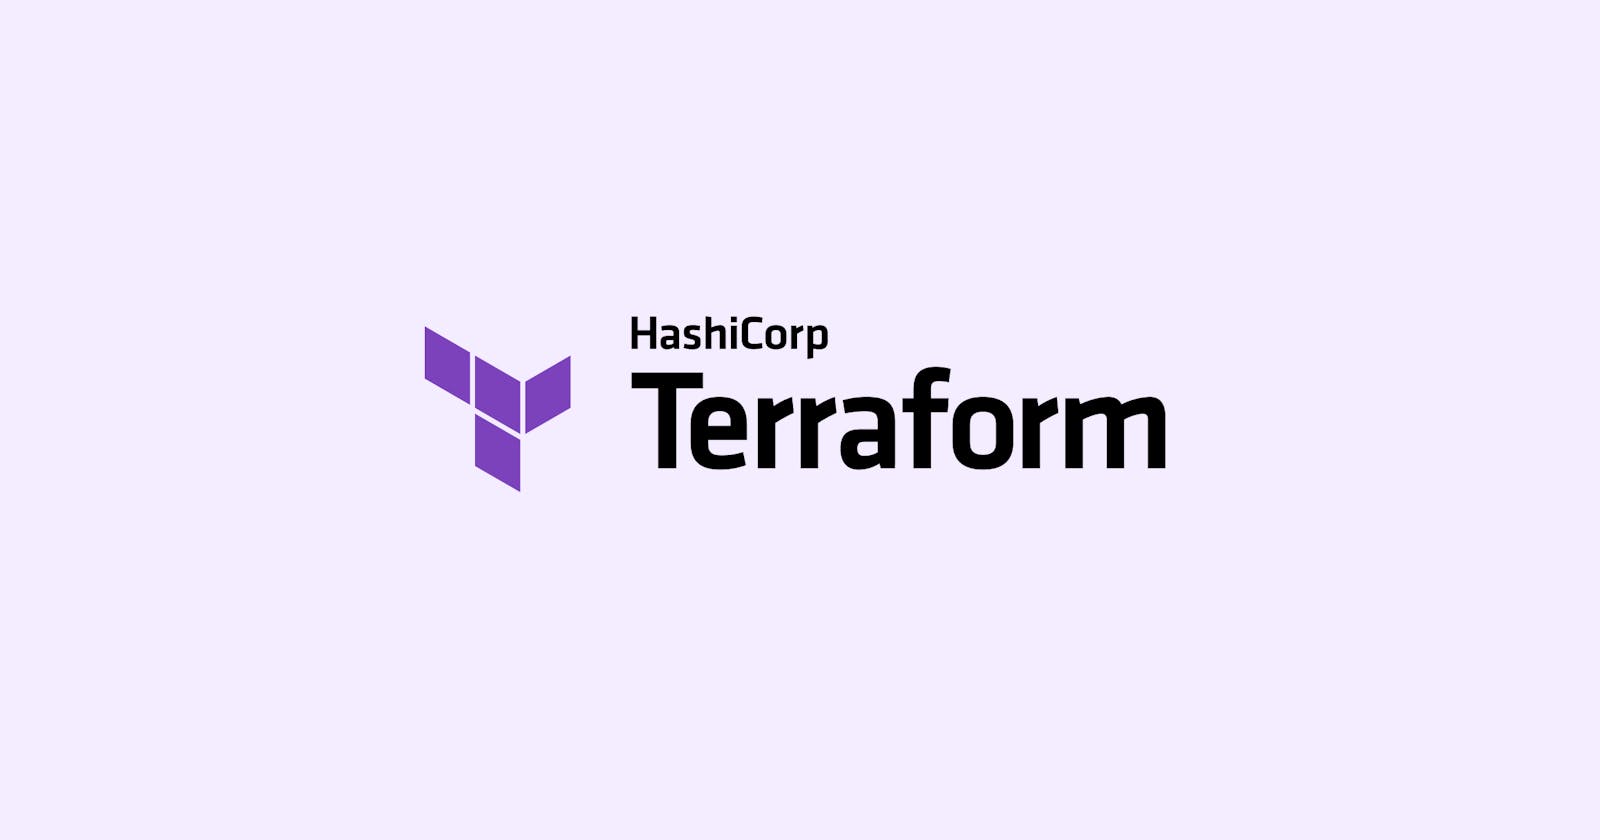 How to deploy VPC instance in your aws console by .tf file using terraform